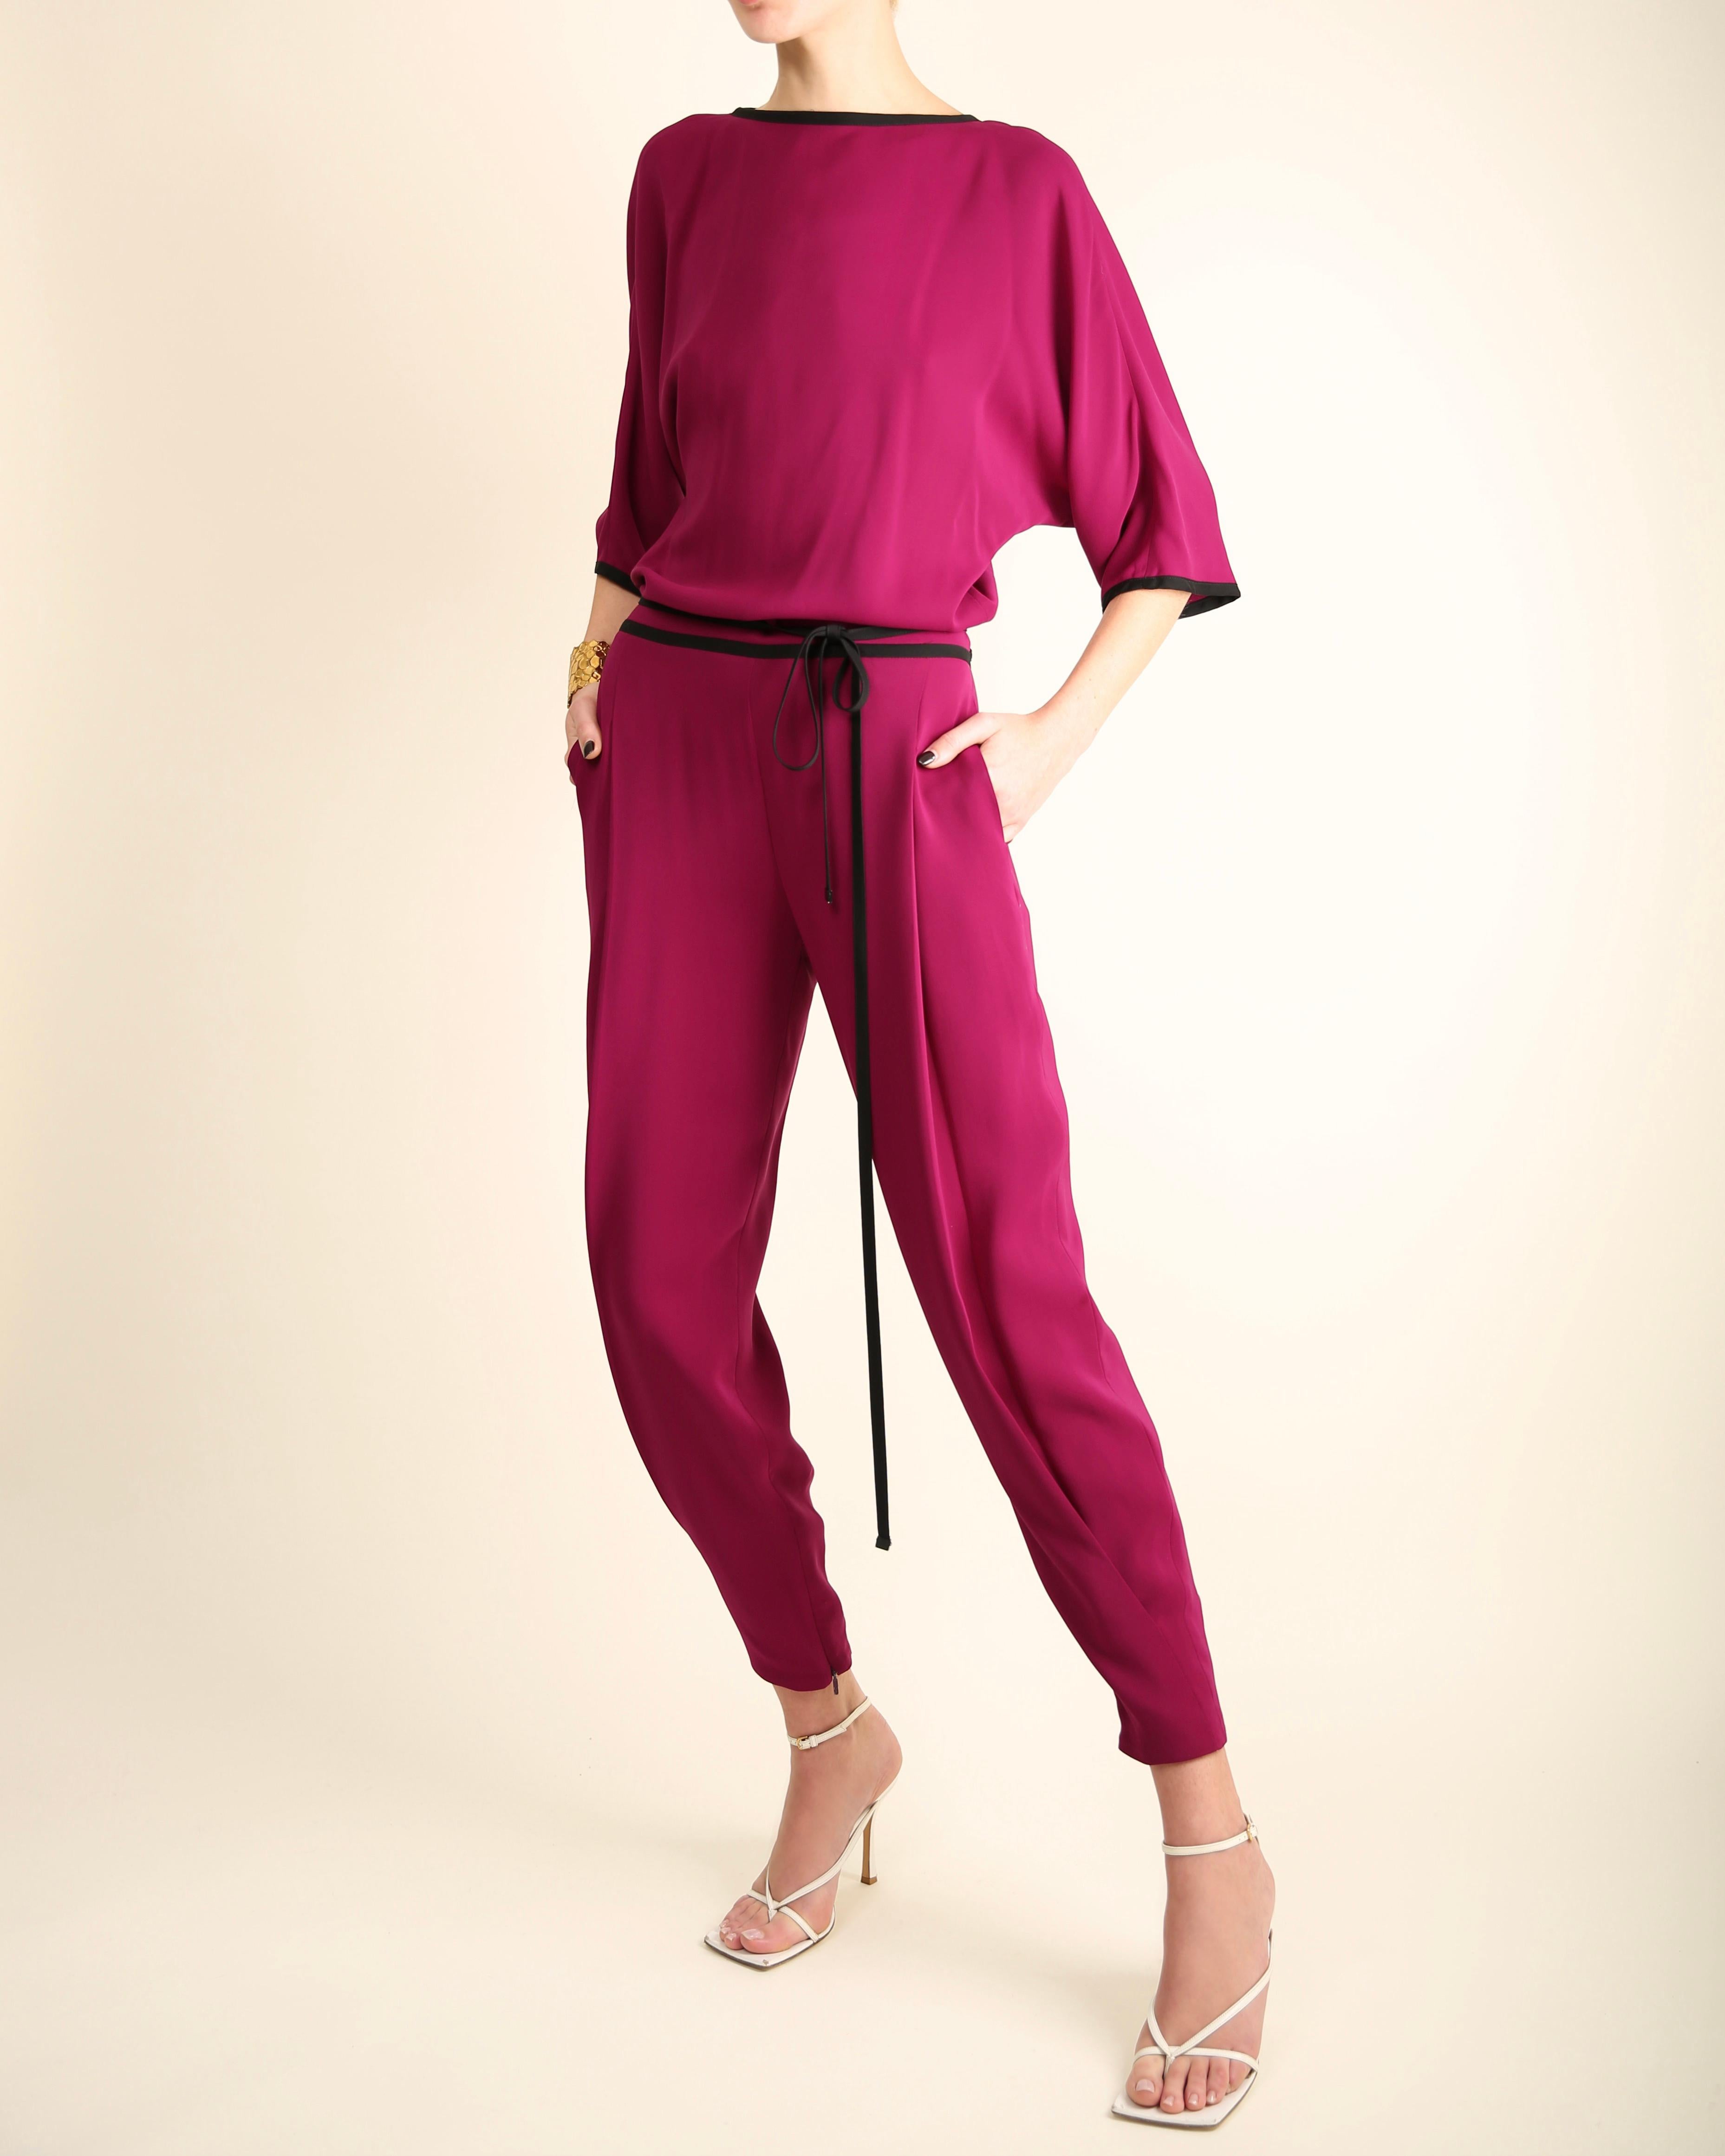 Gucci S/S 2014 silk magenta black backless dolman tapered pant jumpsuit  For Sale 3